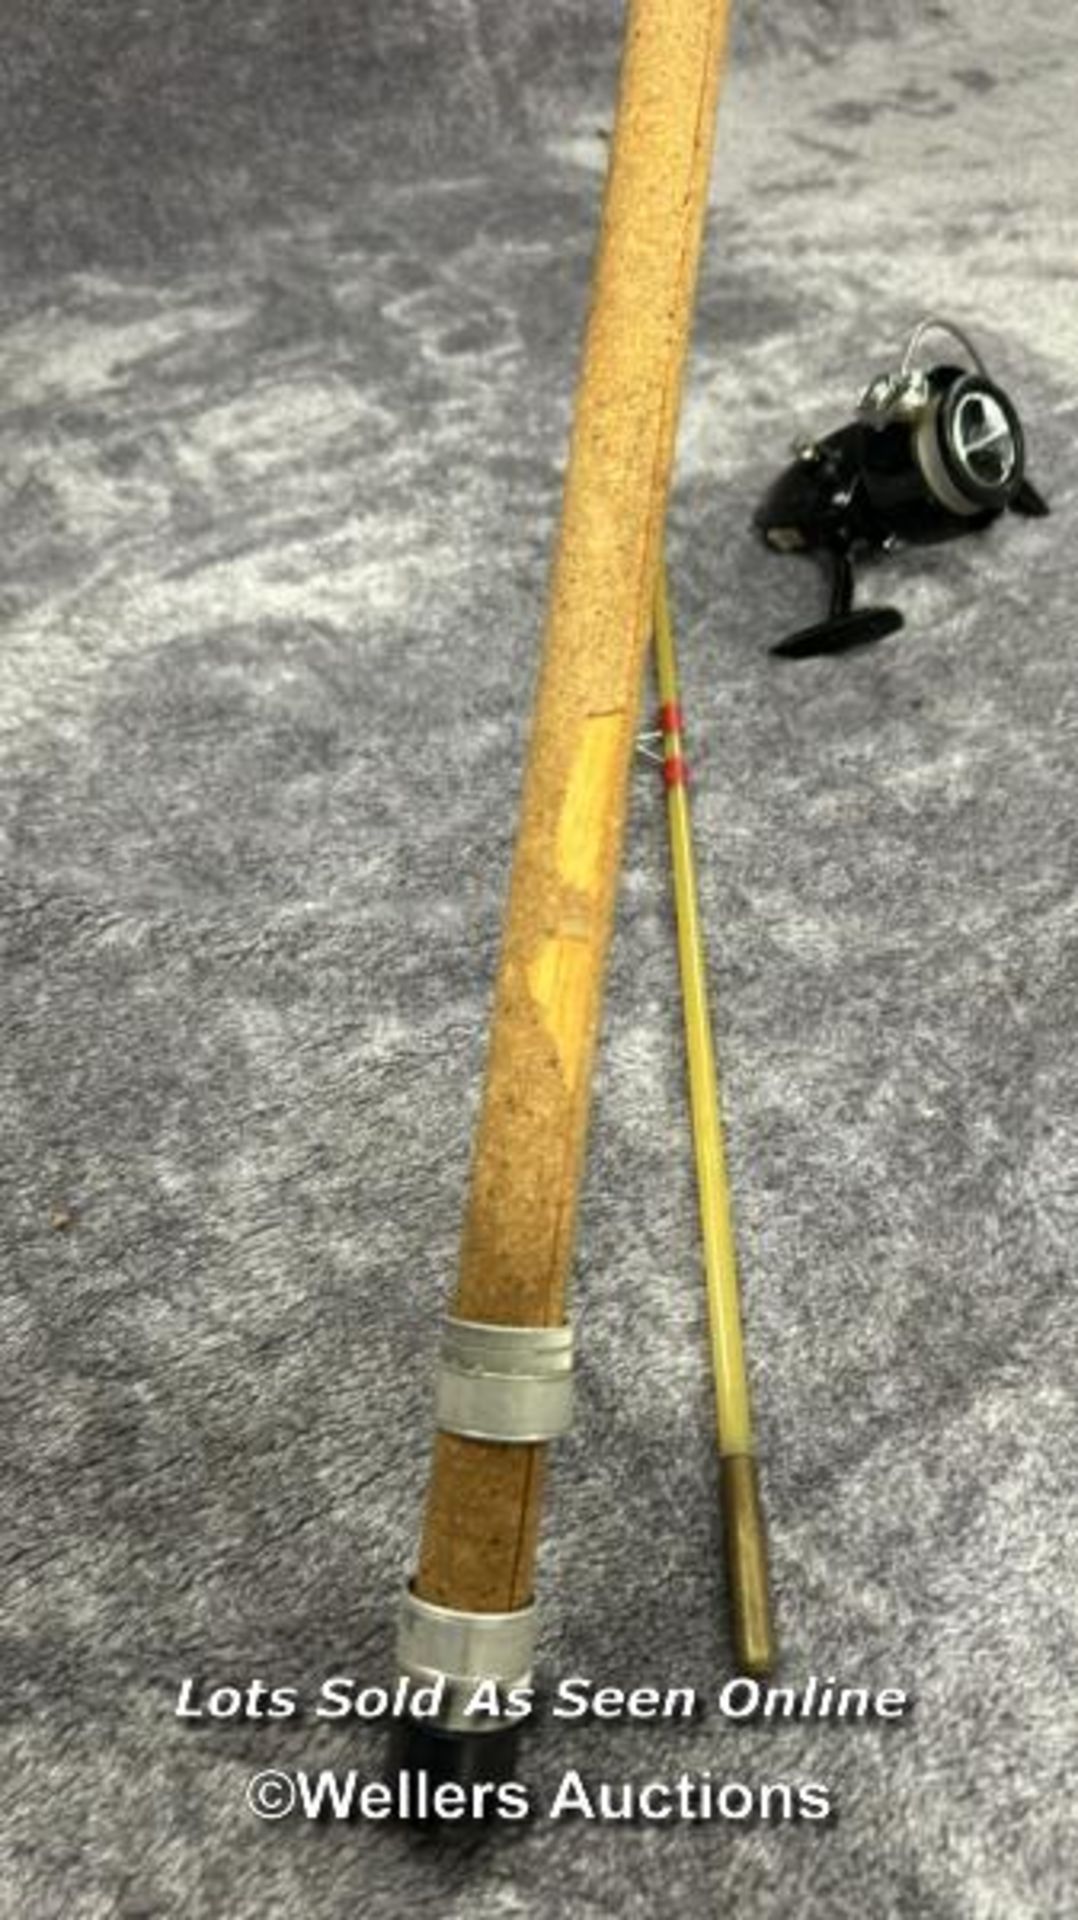 Vintage fibreglass fishing rod with cork handle, 265cm long with a Prince regent reel / AN16 - Image 2 of 4